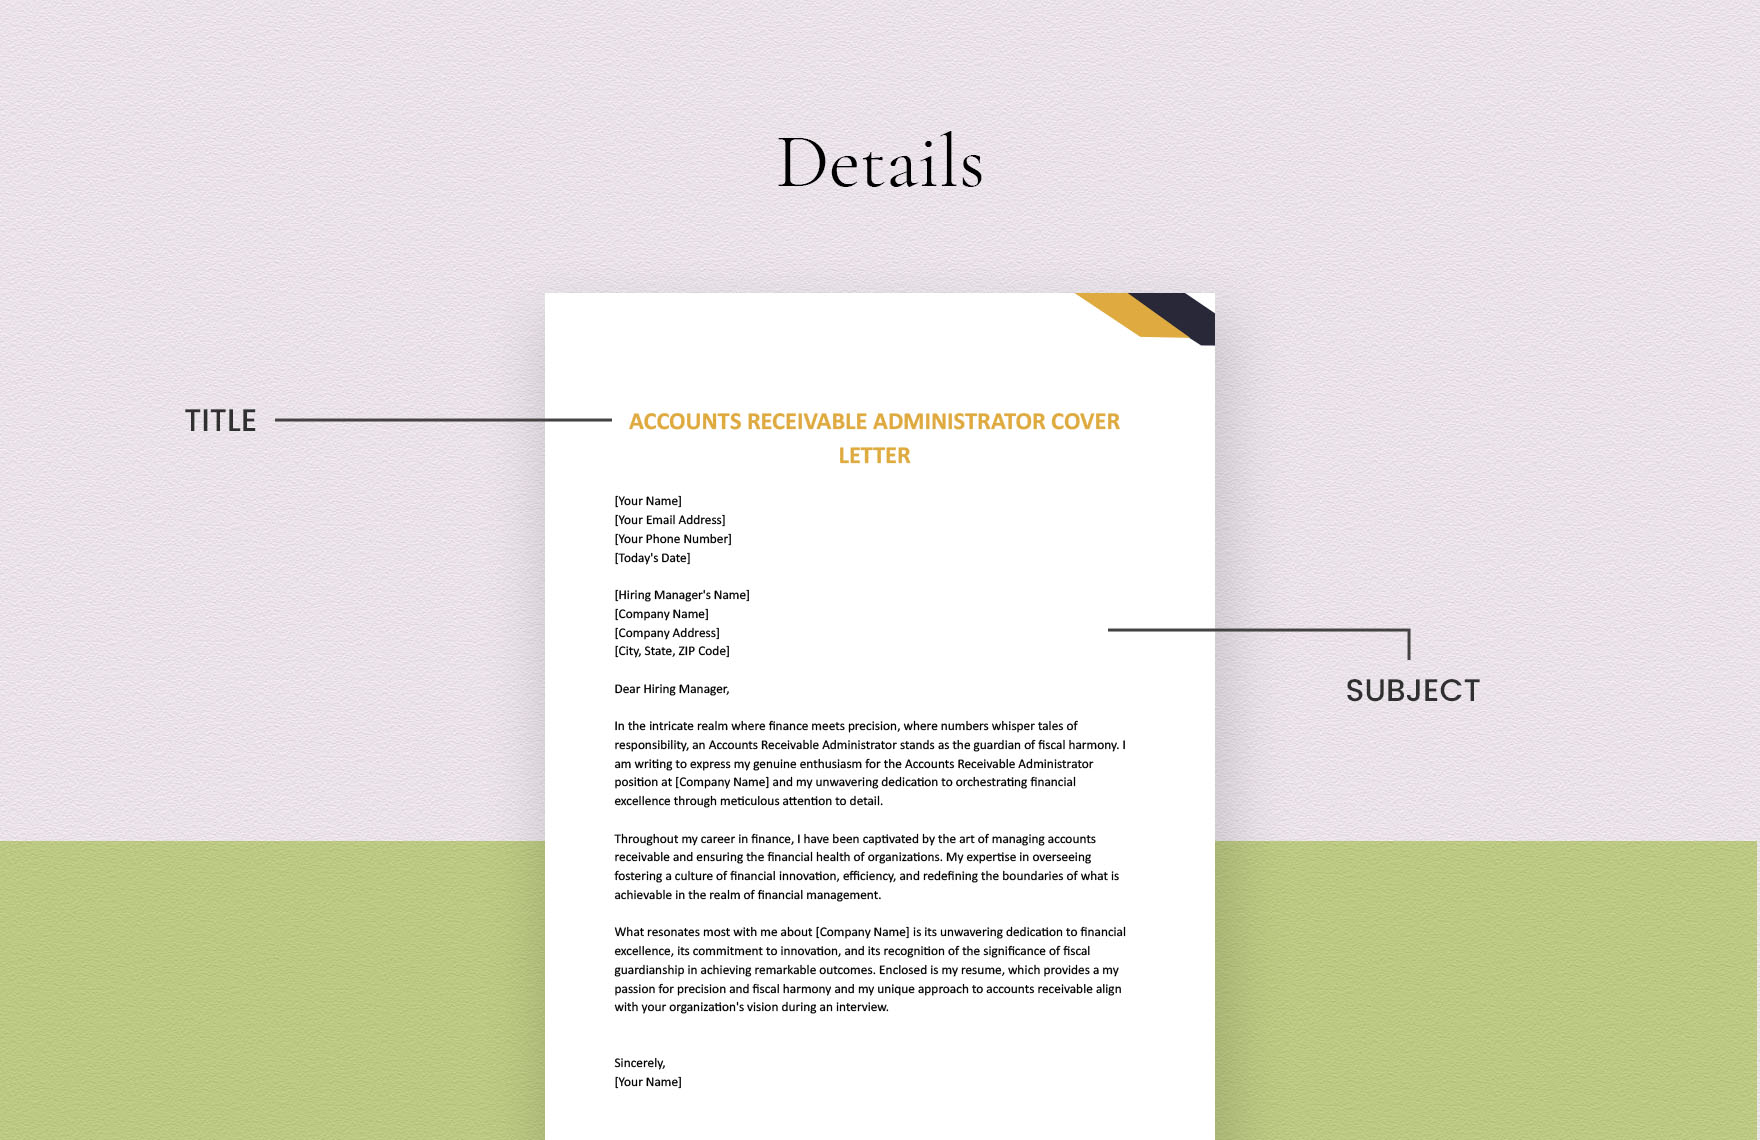 Accounts Receivable Administrator Cover Letter